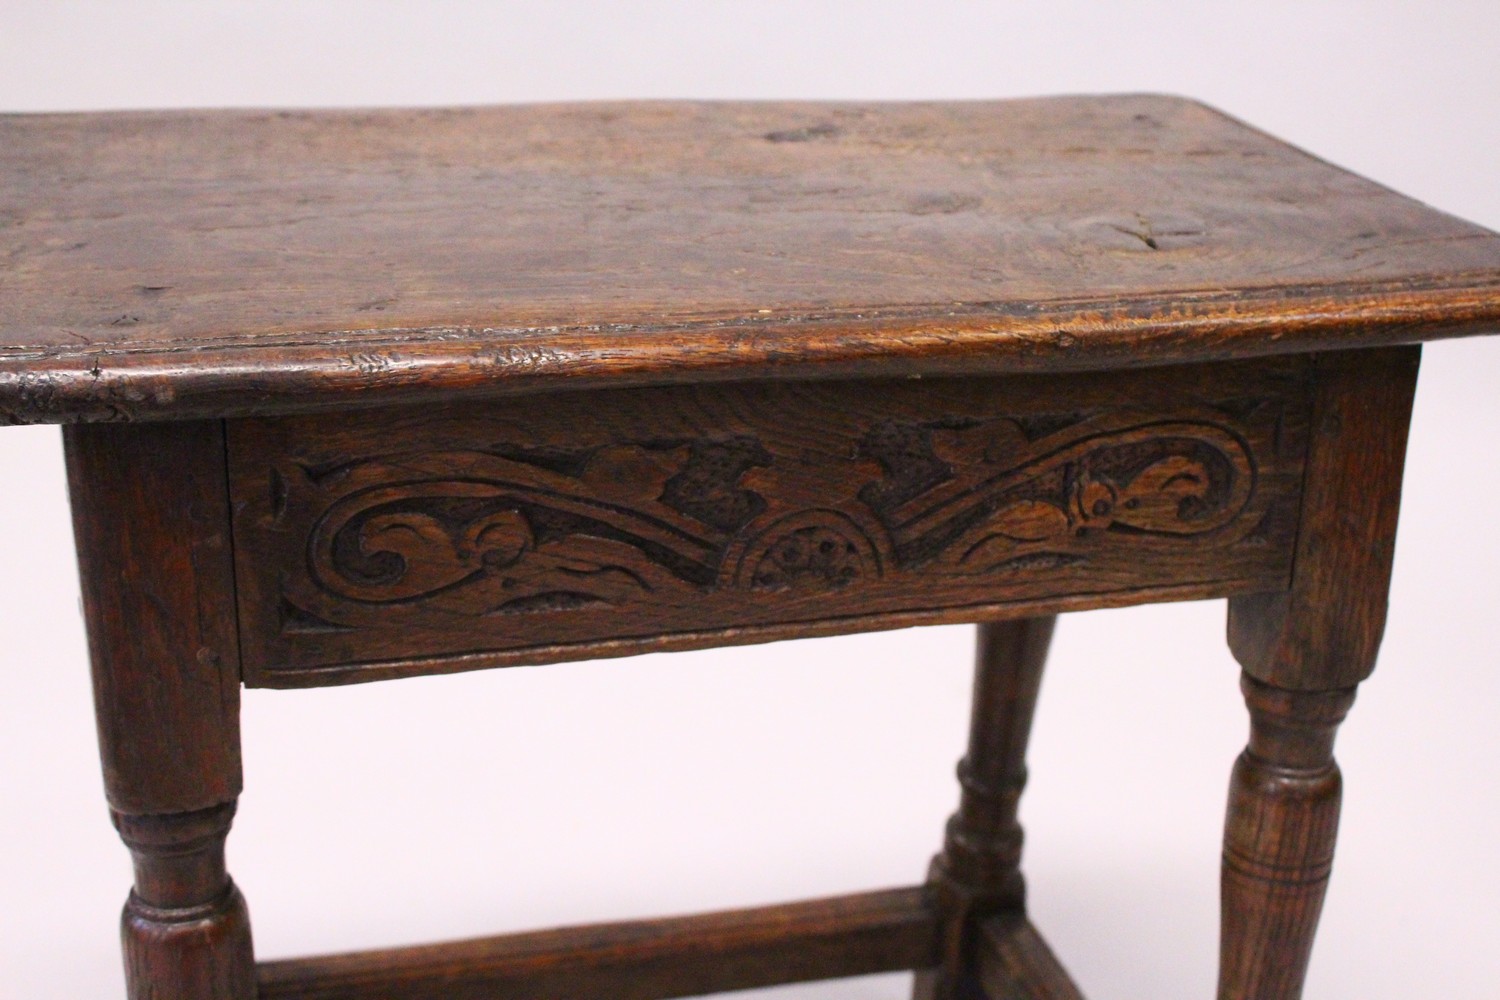 AN 18TH CENTURY OAK JOINT STOOL, with moulded top, carved frieze on turned legs united by - Image 2 of 4